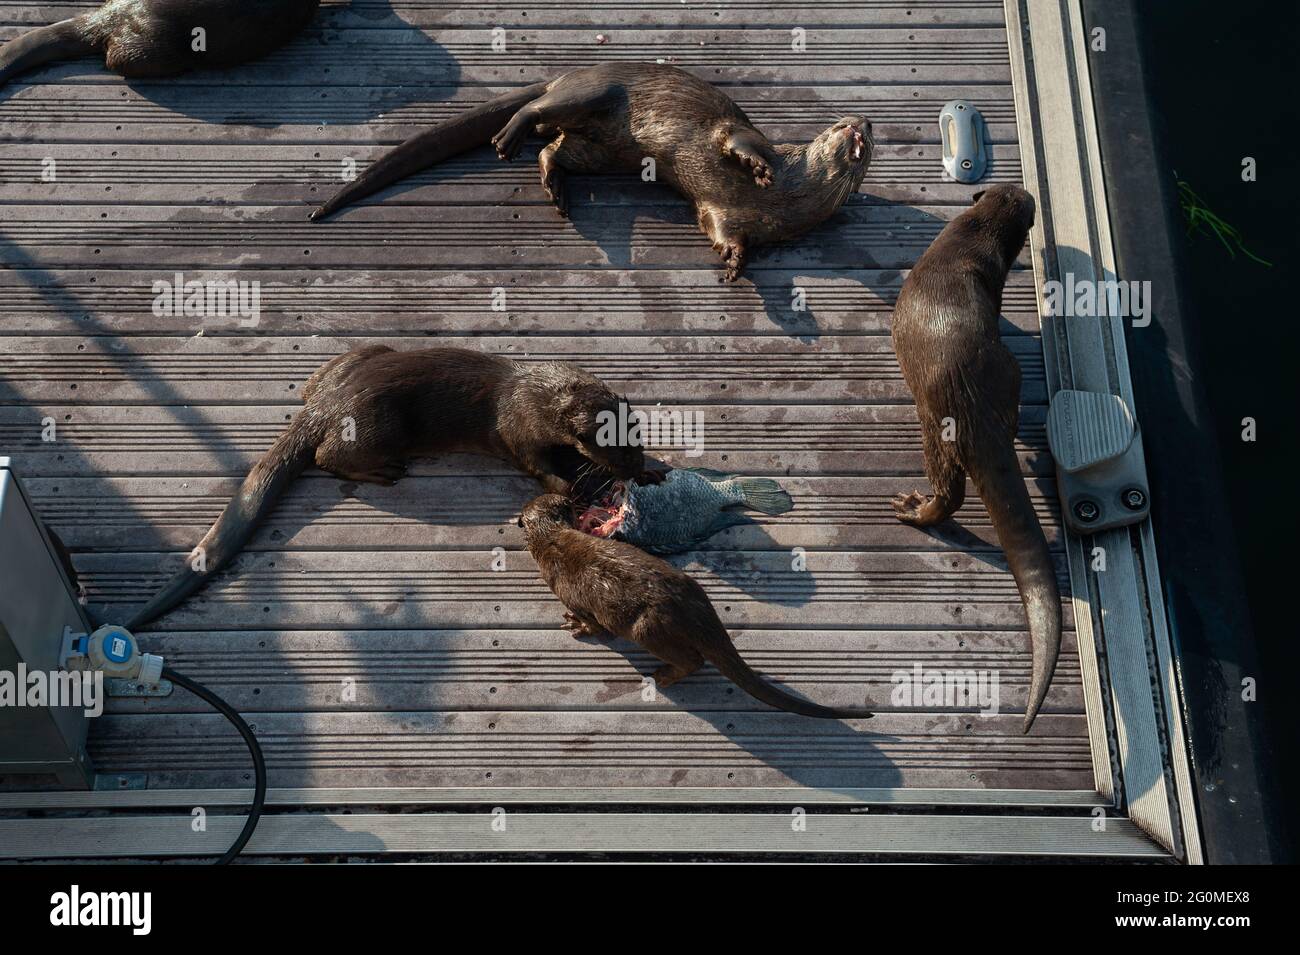 25.05.2021, Singapore, Republic of Singapore, Asia - Group of smooth-coated otters of the so-called Bishan Otter Family that resides around Marina Bay. Stock Photo